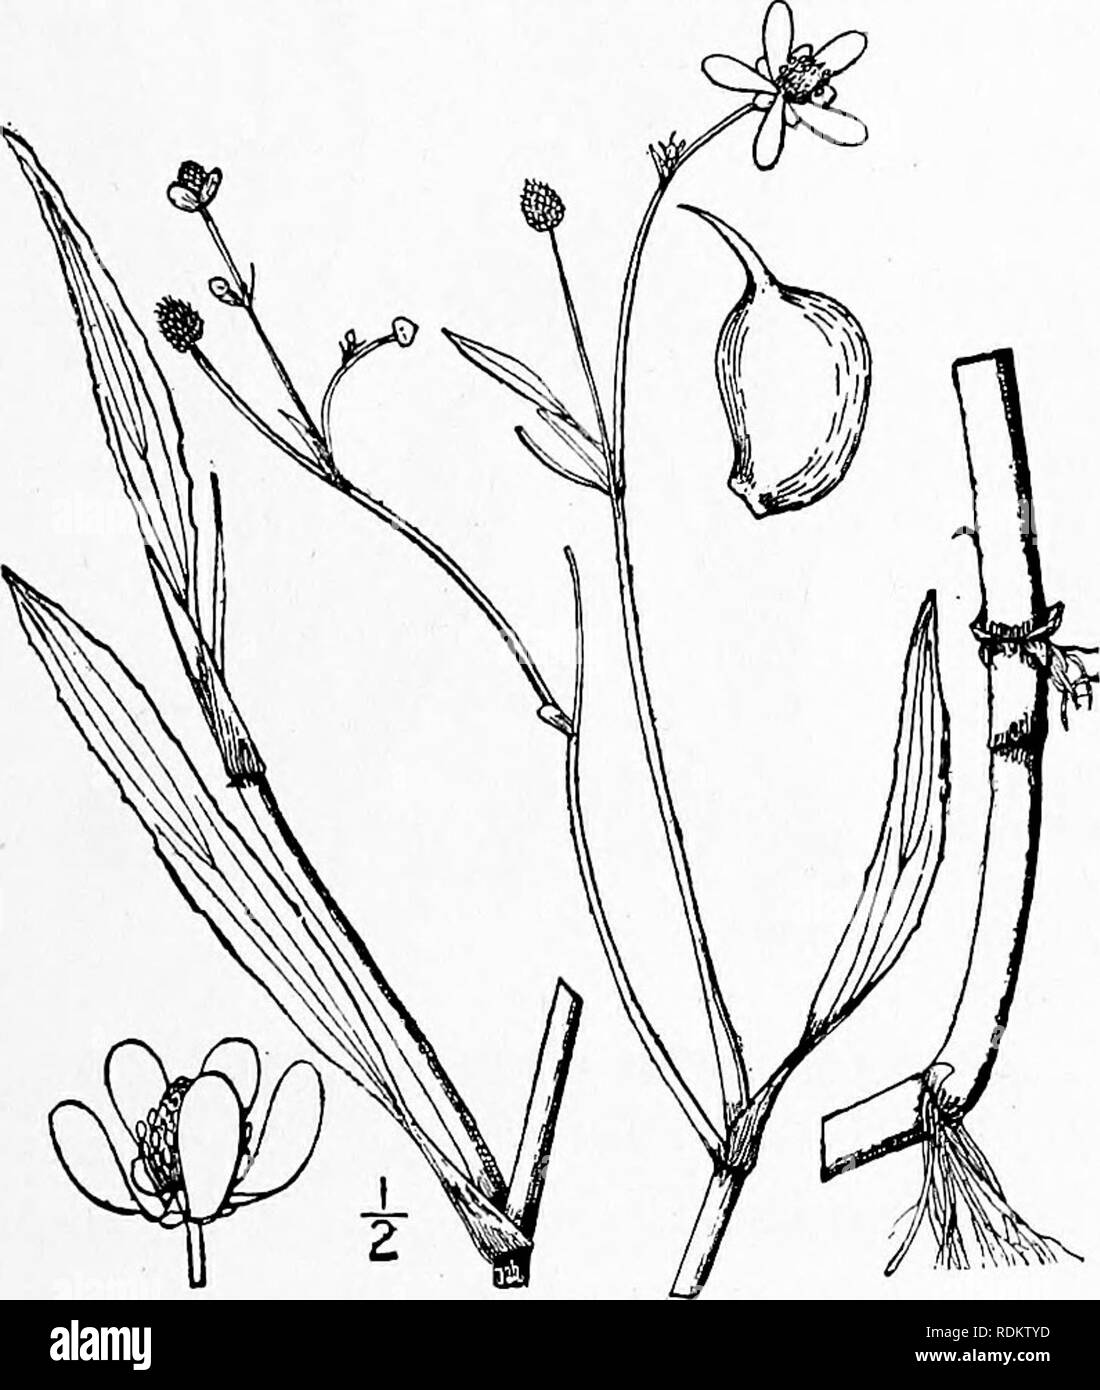 . An illustrated flora of the northern United States, Canada and the British possessions, from Newfoundland to the parallel of the southern boundary of Virginia, and from the Atlantic Ocean westward to the 102d meridian. Botany; Botany. 7. Ranunculus reptans L. Creeping Spearwort Ranunculus reptans L. Sp. PI. 549. 1753. Ranunculus filiformis Michx. Fl. Bor. Am. i : 320. 1803. Ranunculus Flainmula var. reptans E. Meyer. PI. Lab. 96. 1830. R. Flainmula intermedius Hook. Fl. Bor. Am, i : 11. 1829. Trailing or reclining, glabrous or pubescent, rooting from the nodes, the flowering stems and pedunc Stock Photo